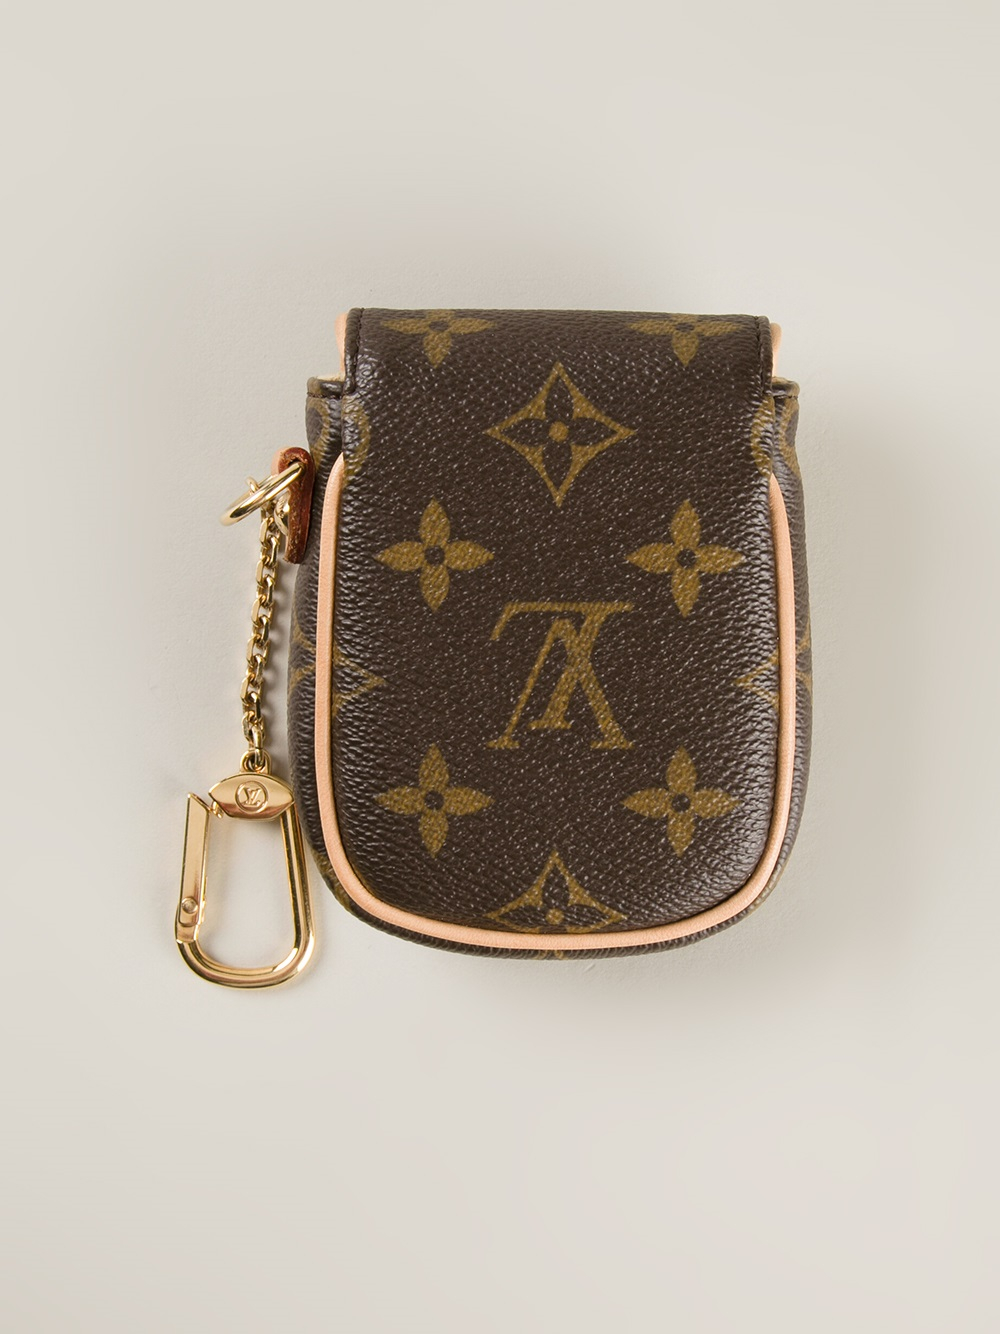 Lyst - Louis Vuitton Mini Pouch Keyring in Brown